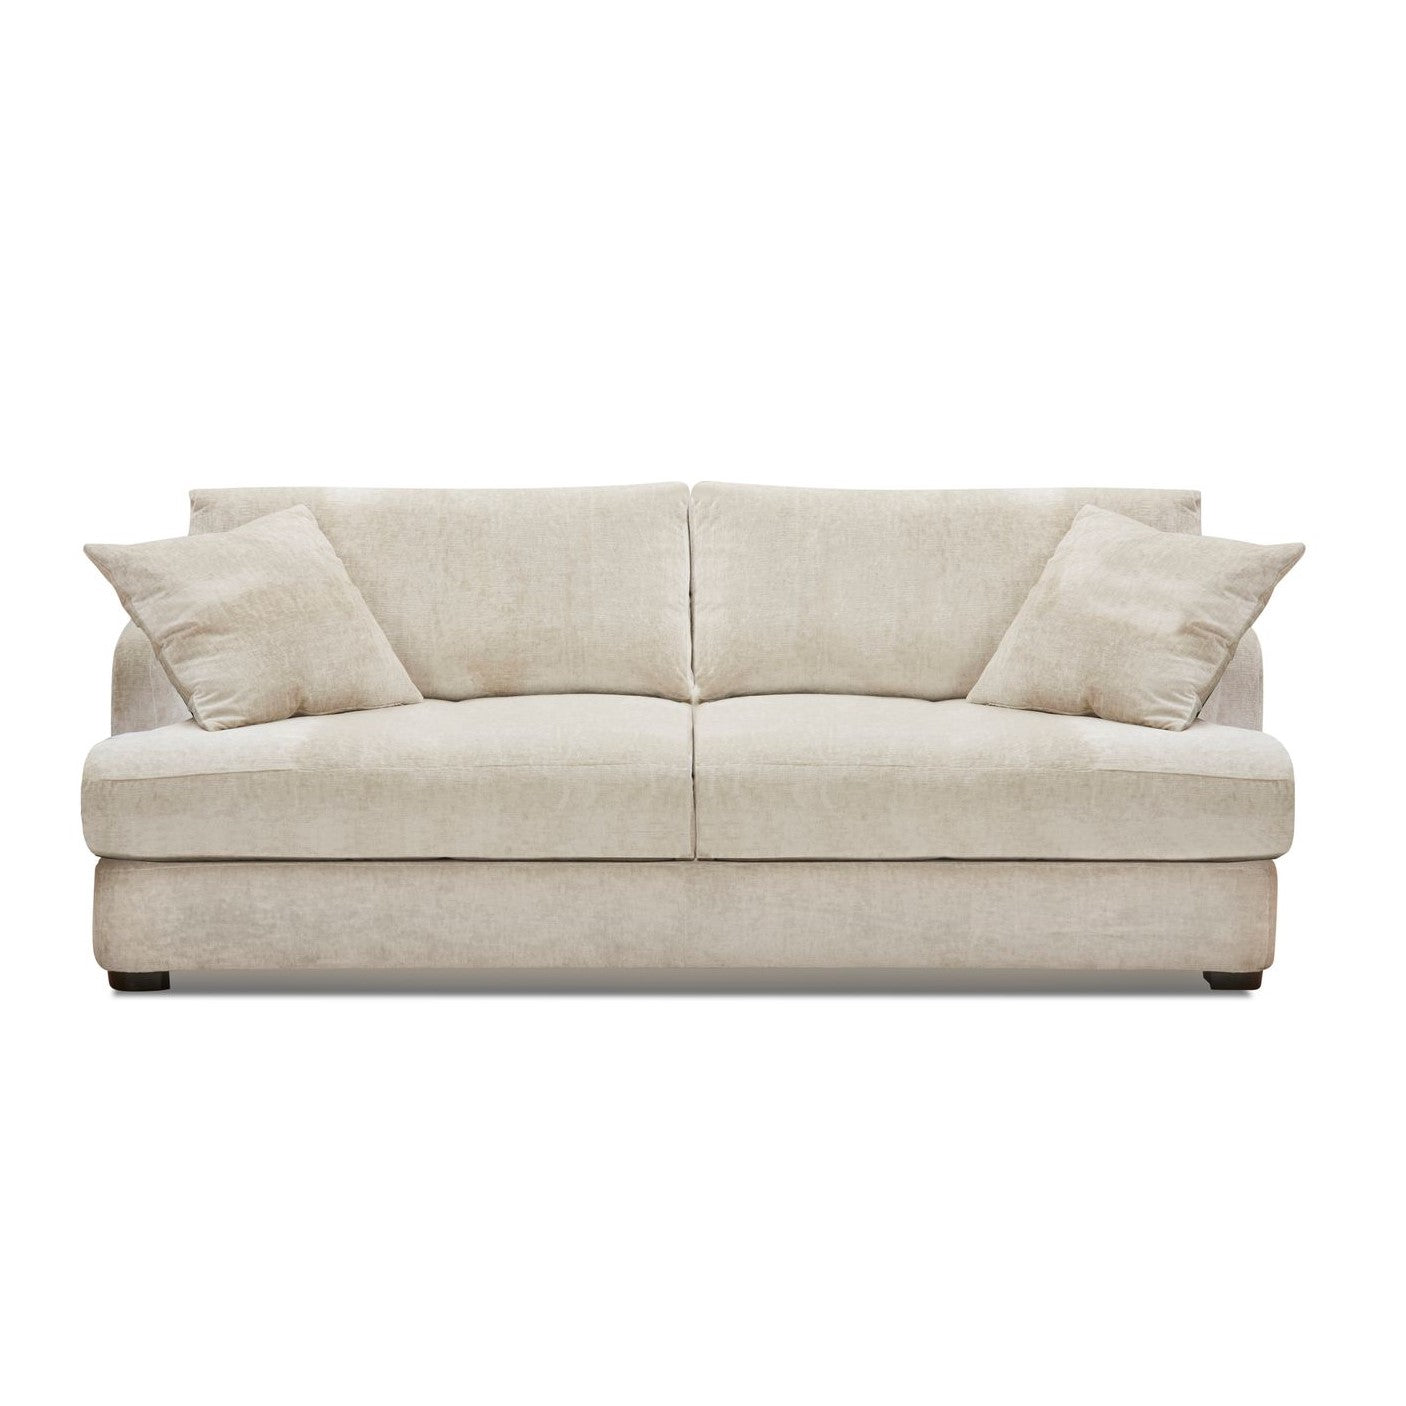 Rodeo Drive Sofa by Molmic available from Make Your House A Home, Furniture Store located in Bendigo, Victoria. Australian Made in Melbourne.